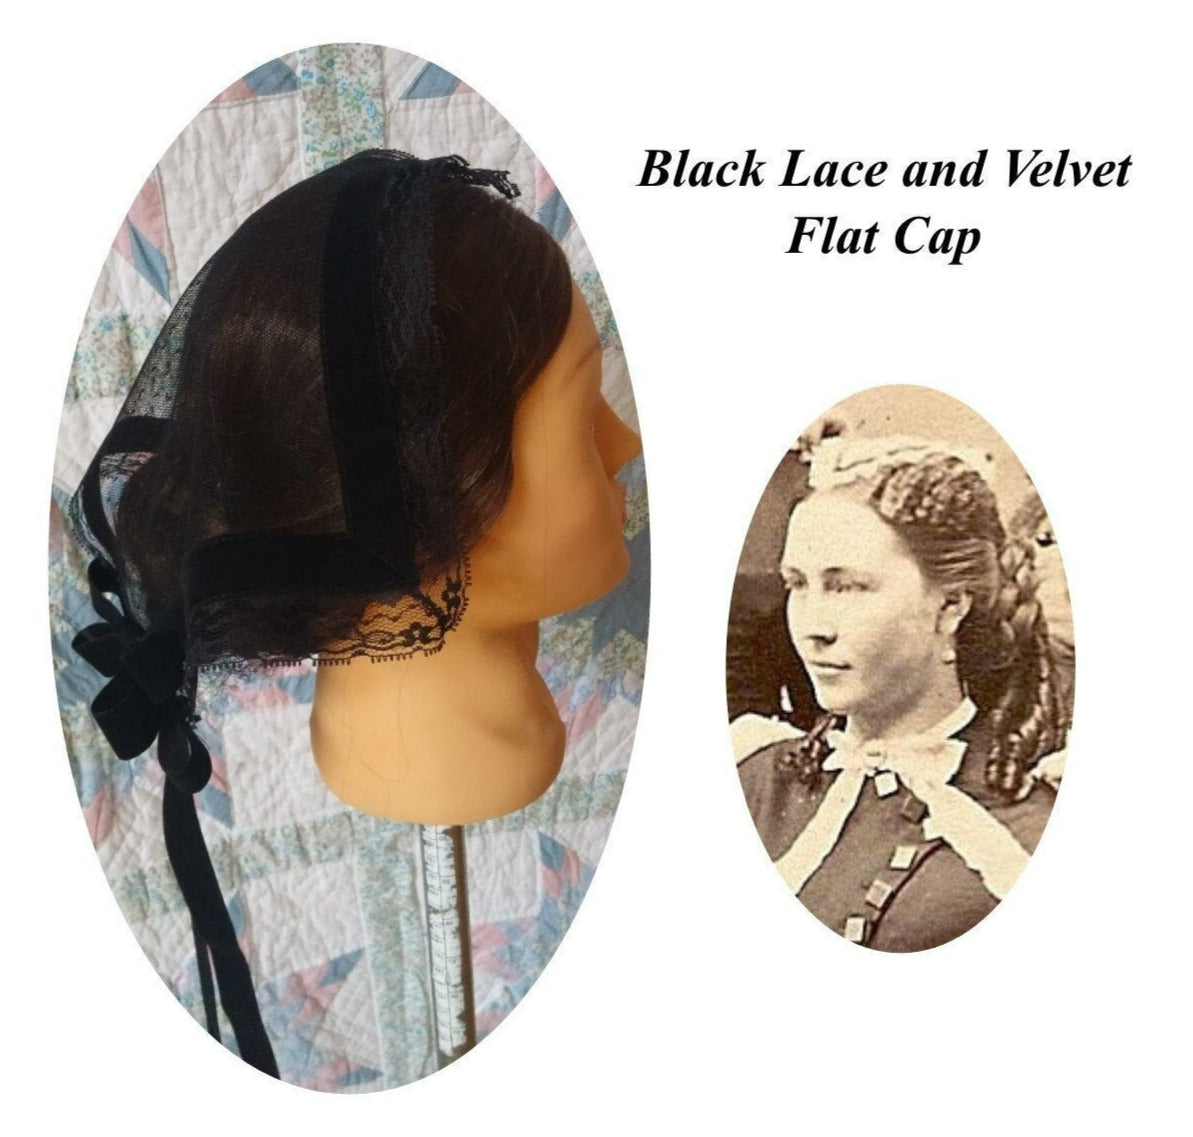 Black Lace Day Cap - Daycap - Flat Cap - Mourning, Historical Headcovering, Breakfast Cap, Civil War, Dickens, Headpiece